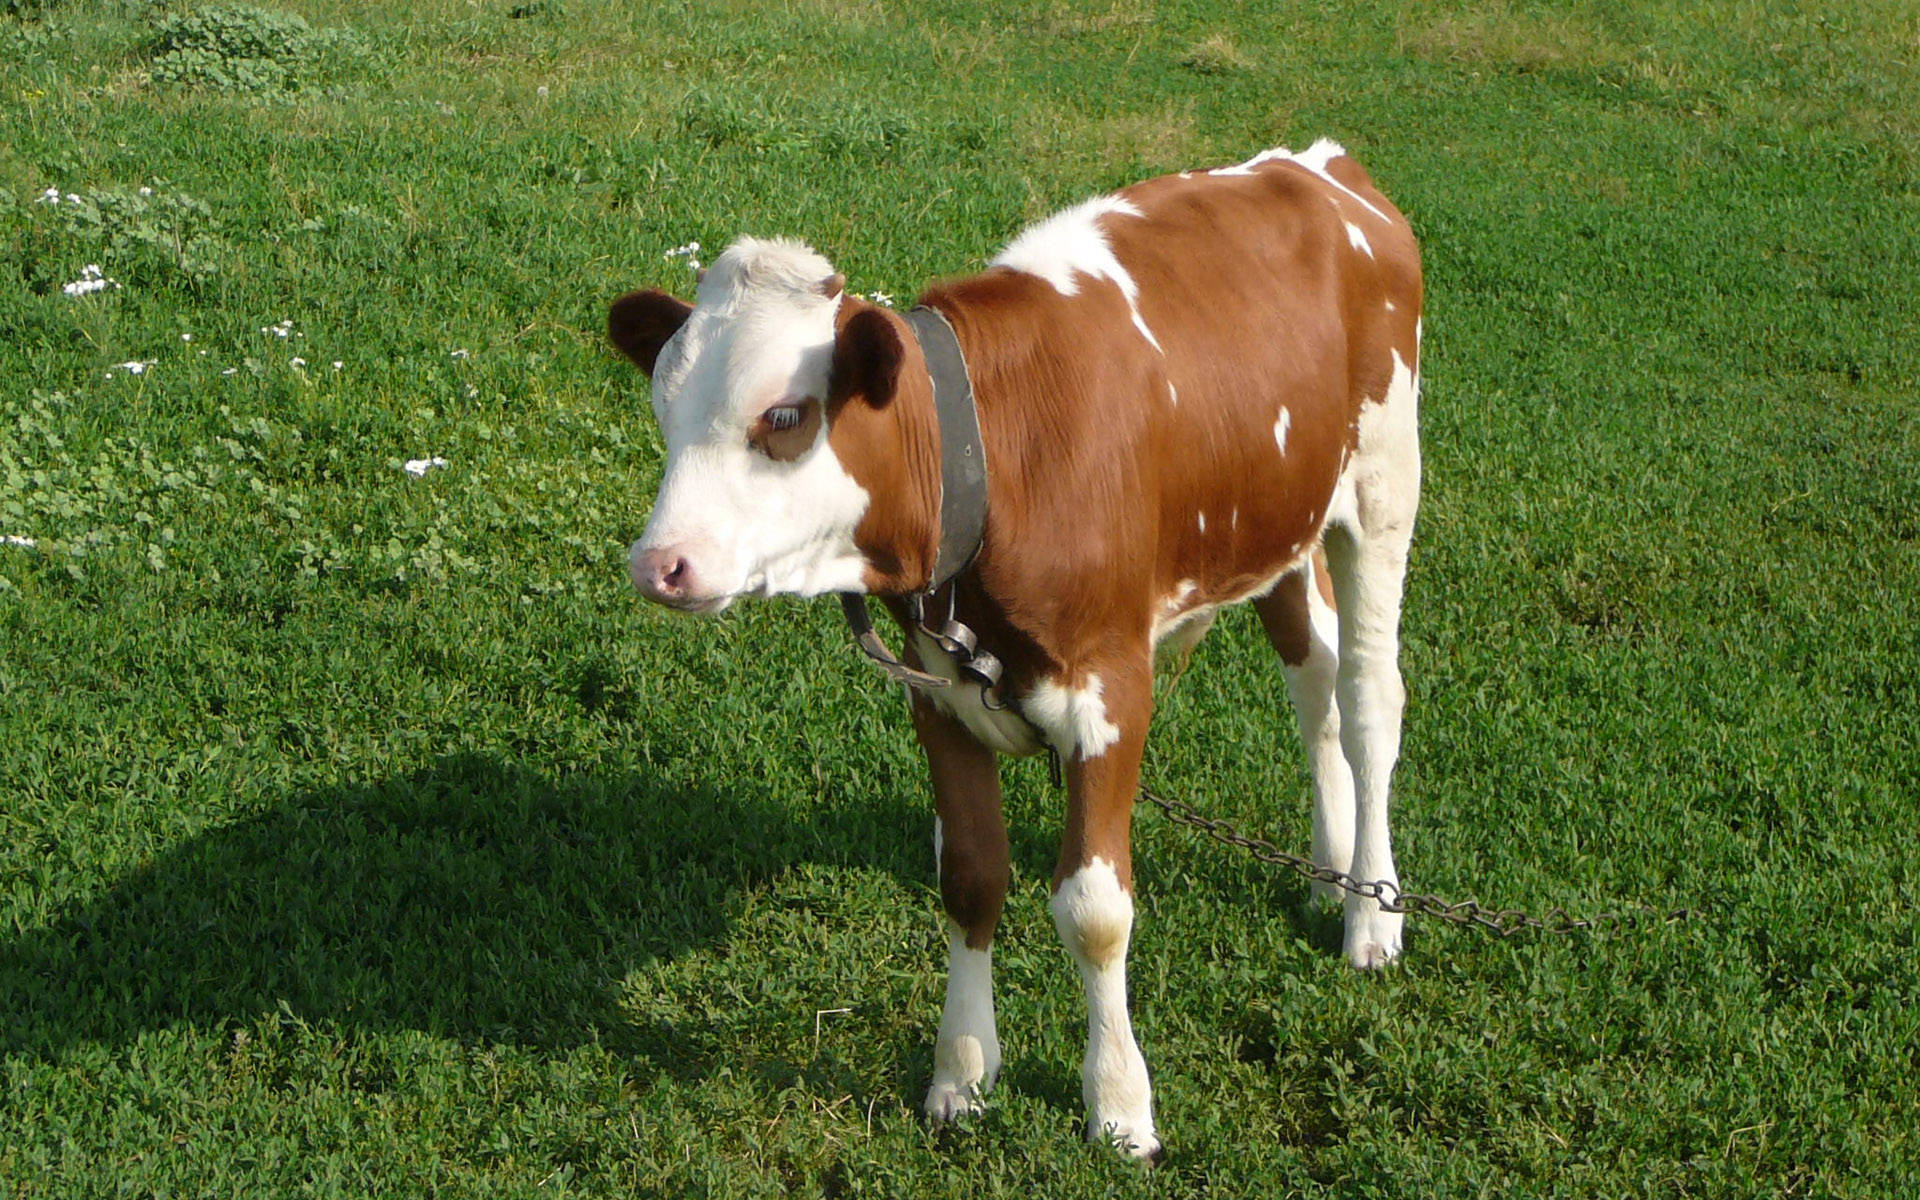 Cute Cow With Black Collar On Grass Background